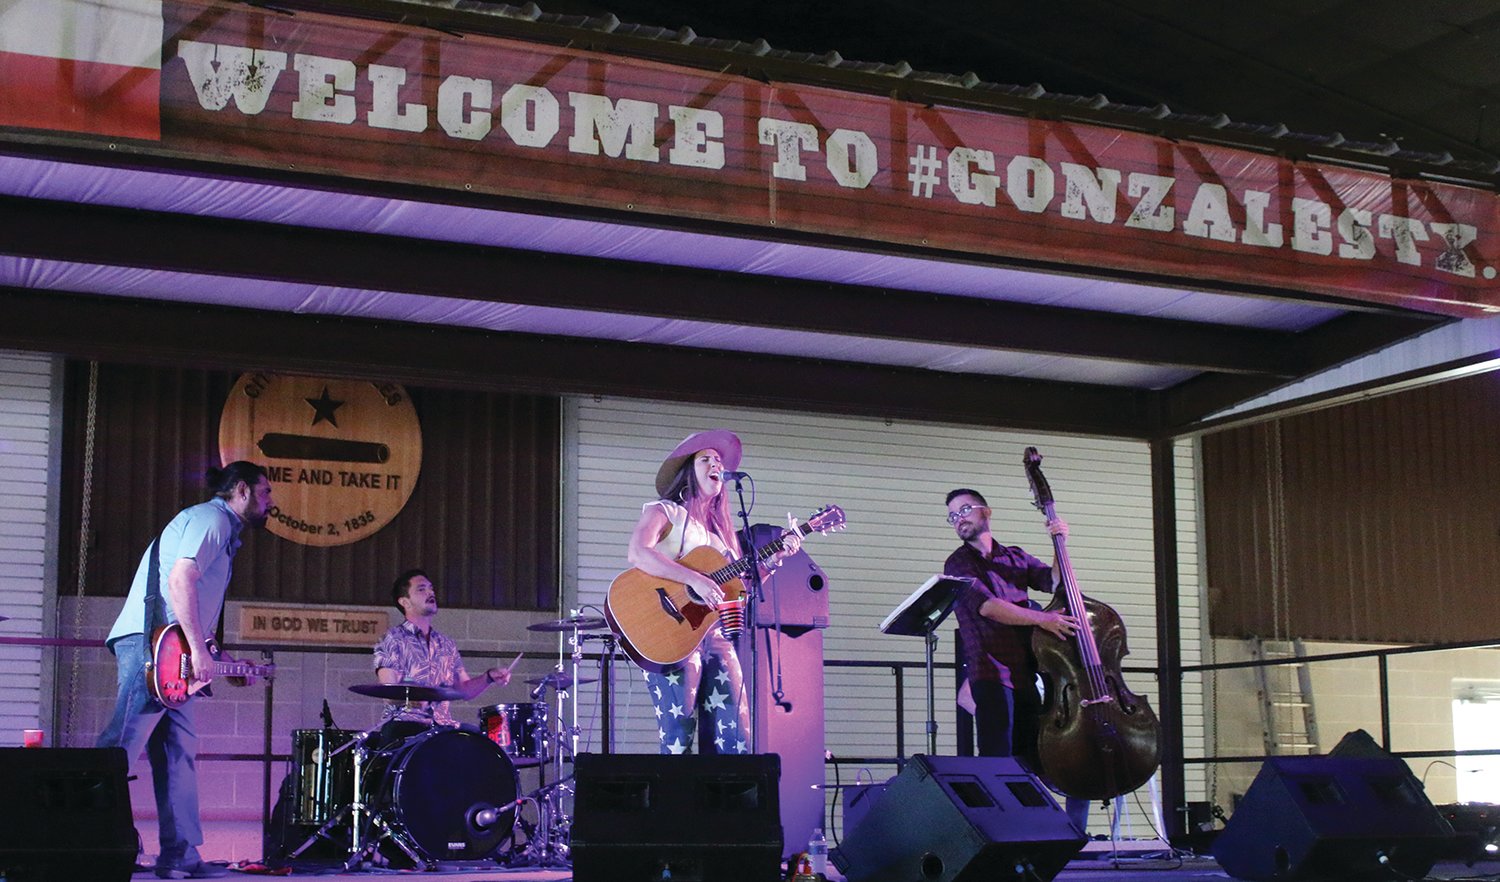 The Summer Concert Series in Gonzales will be held every Saturday in June 2022.